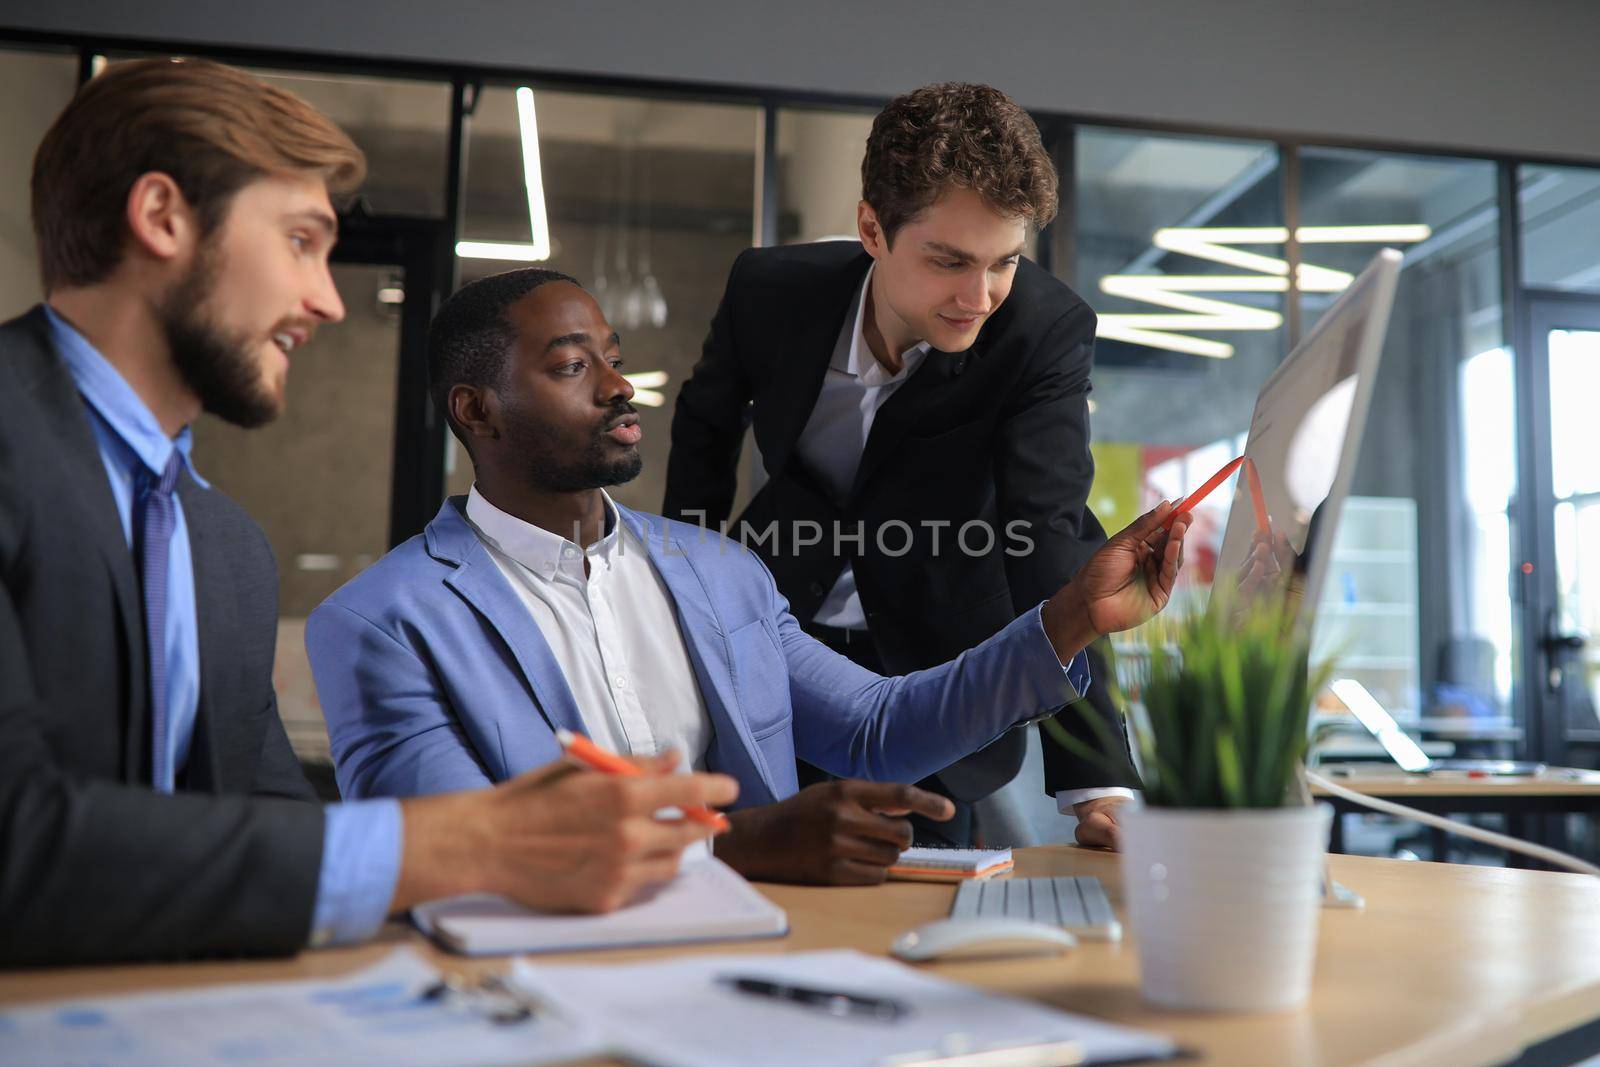 Group of business people in a meeting discussing and planning a project